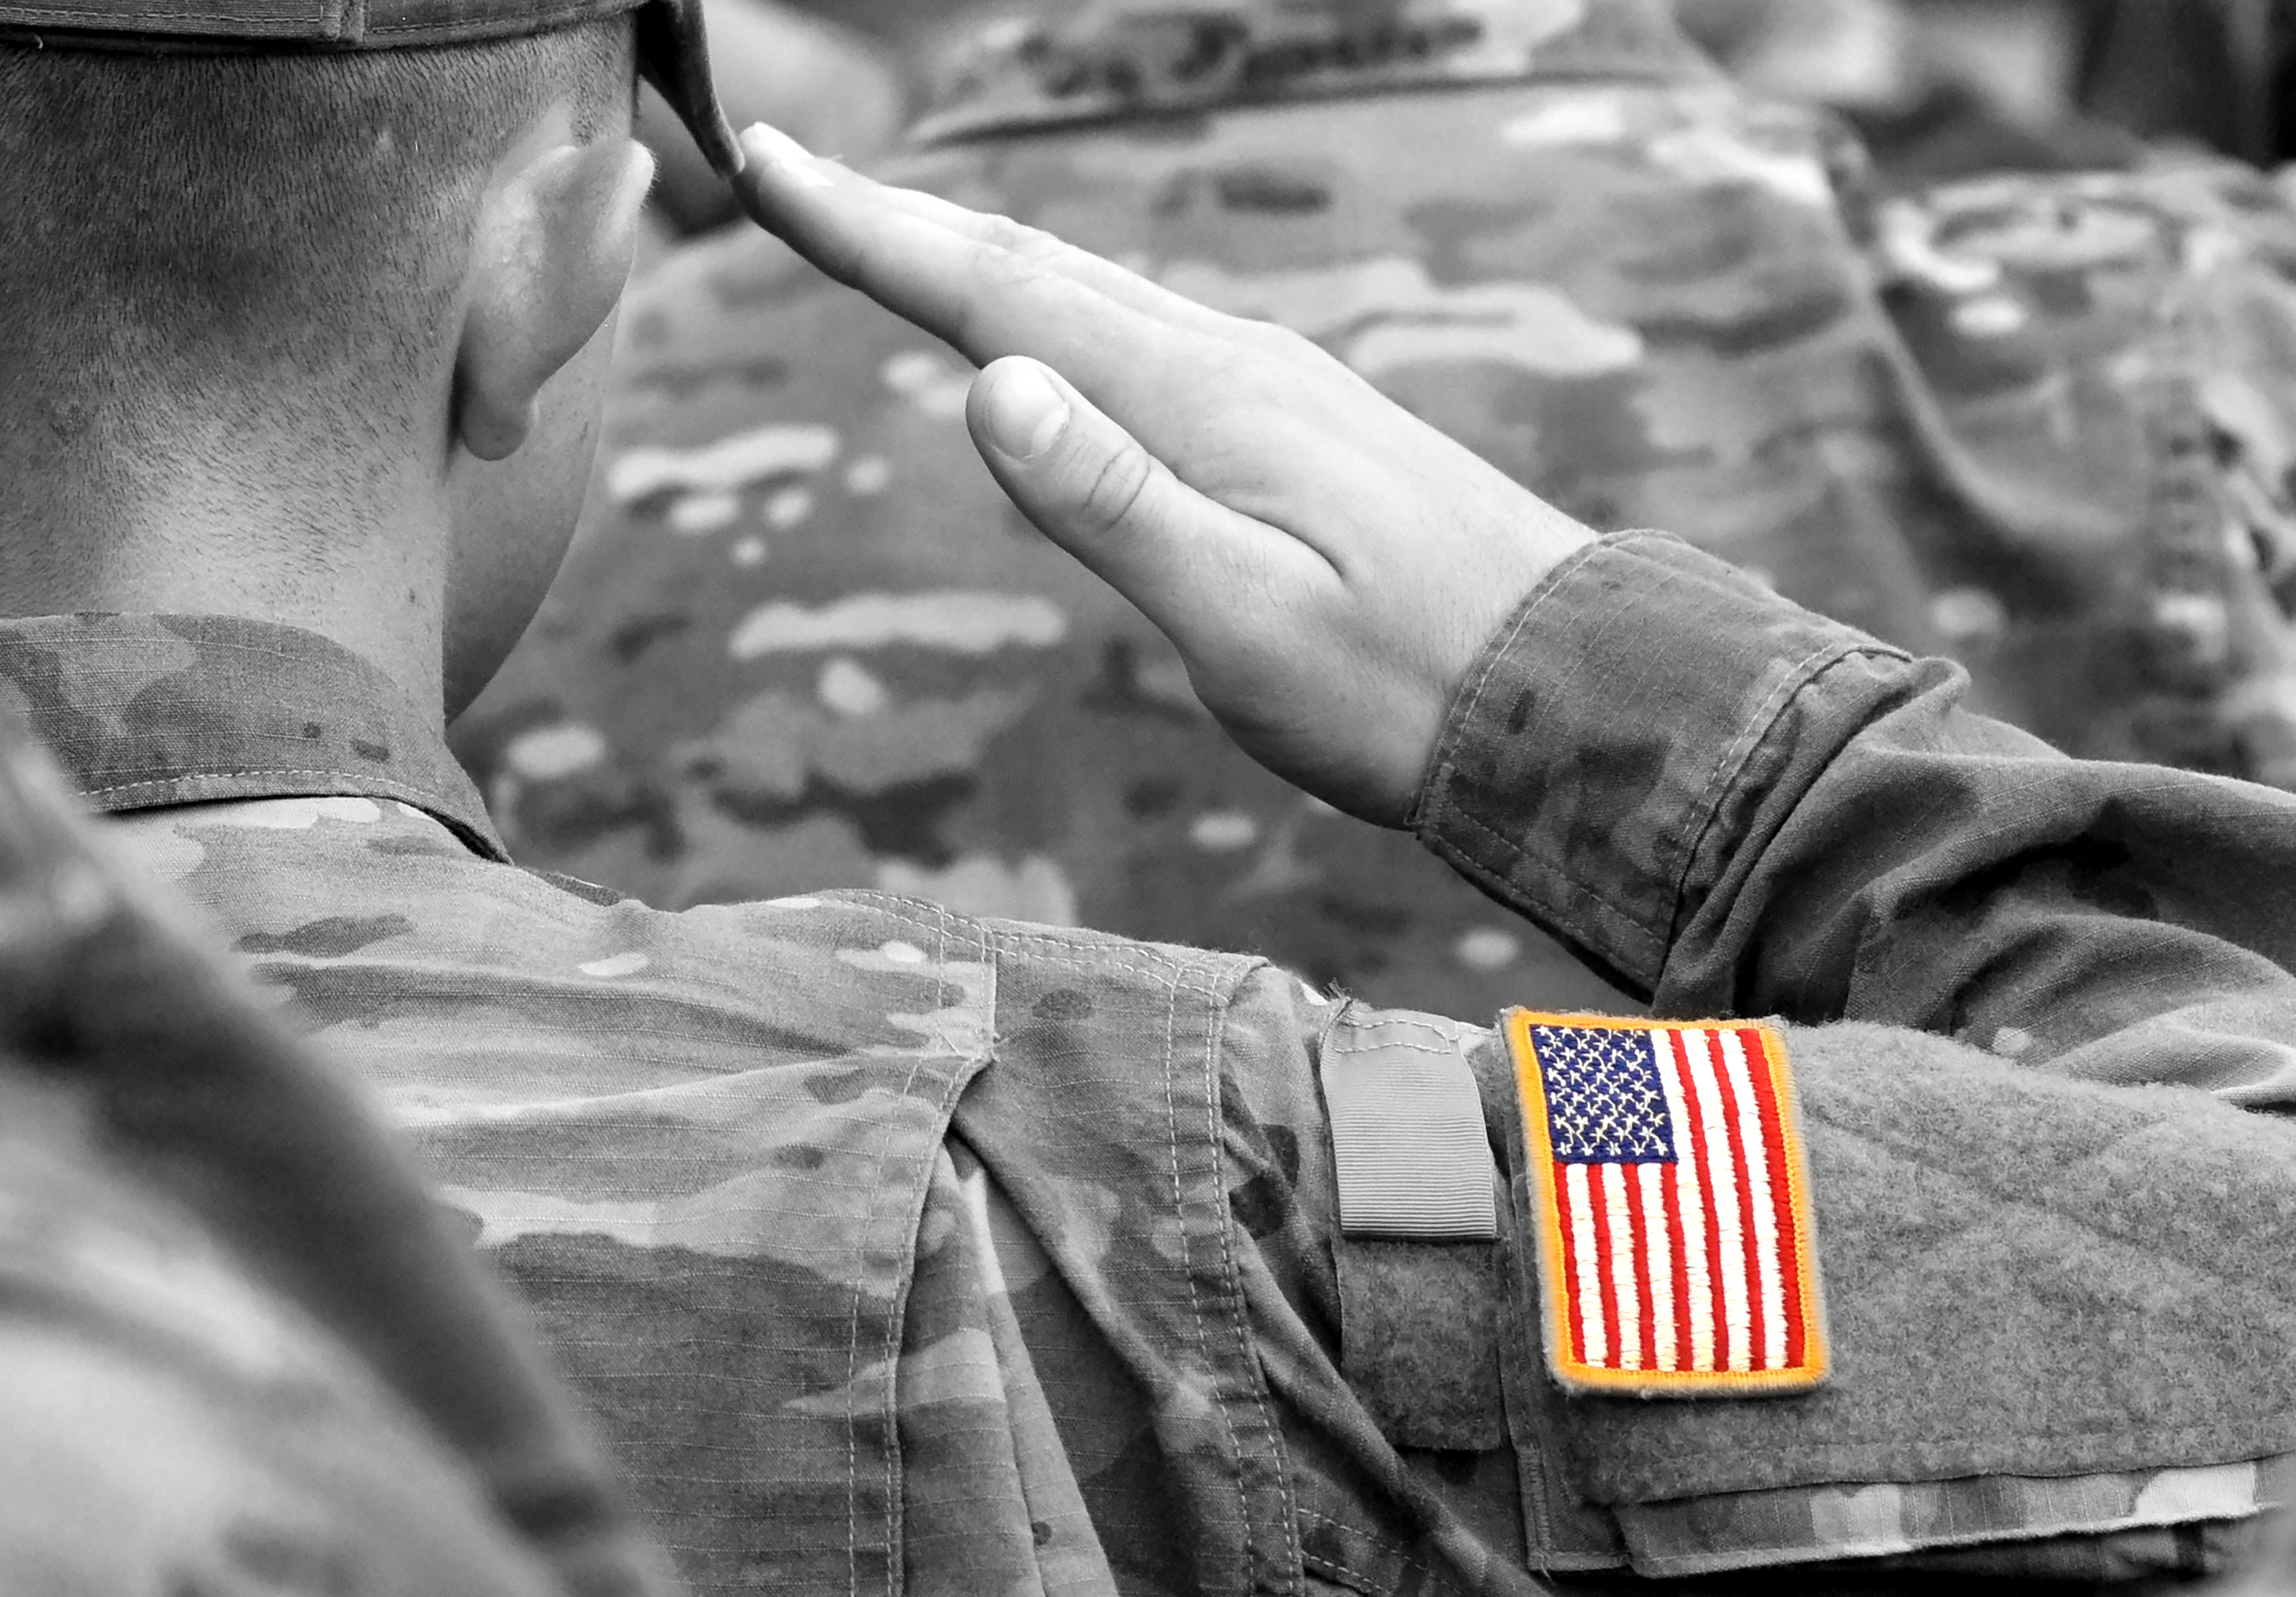 A close up photo of a man in a camouflage uniform saluting. On his sleeve the American flag is shown.